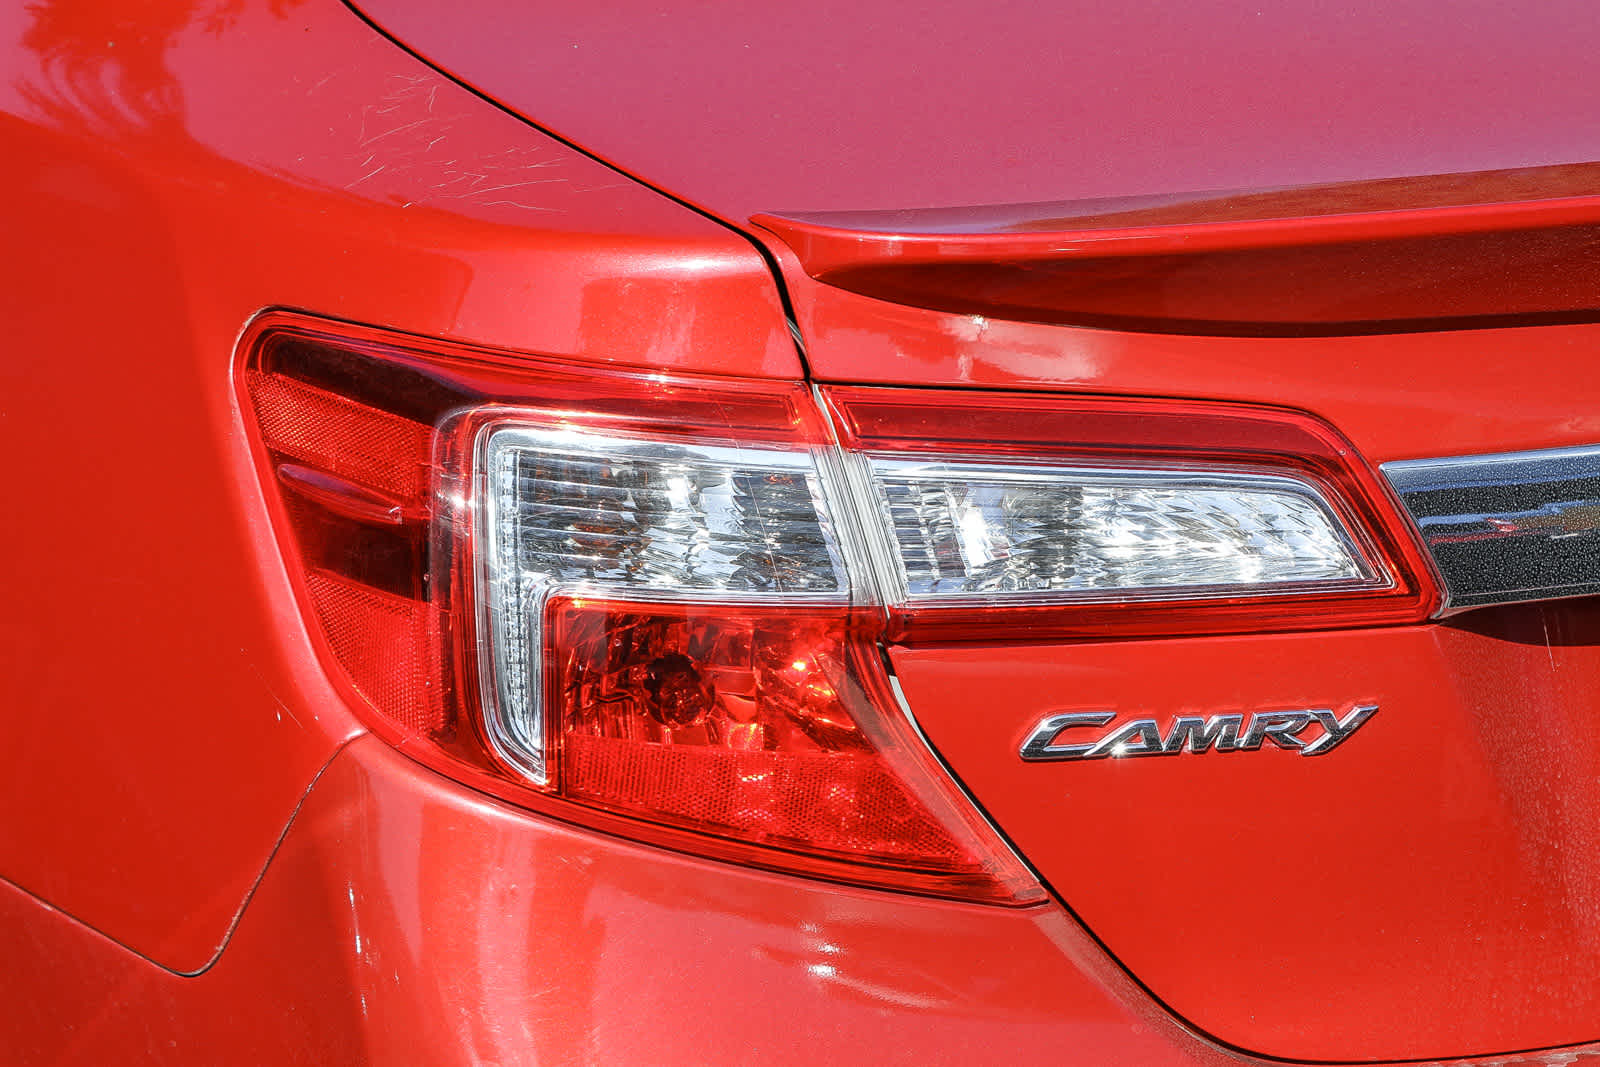 2012 Toyota Camry XLE 16